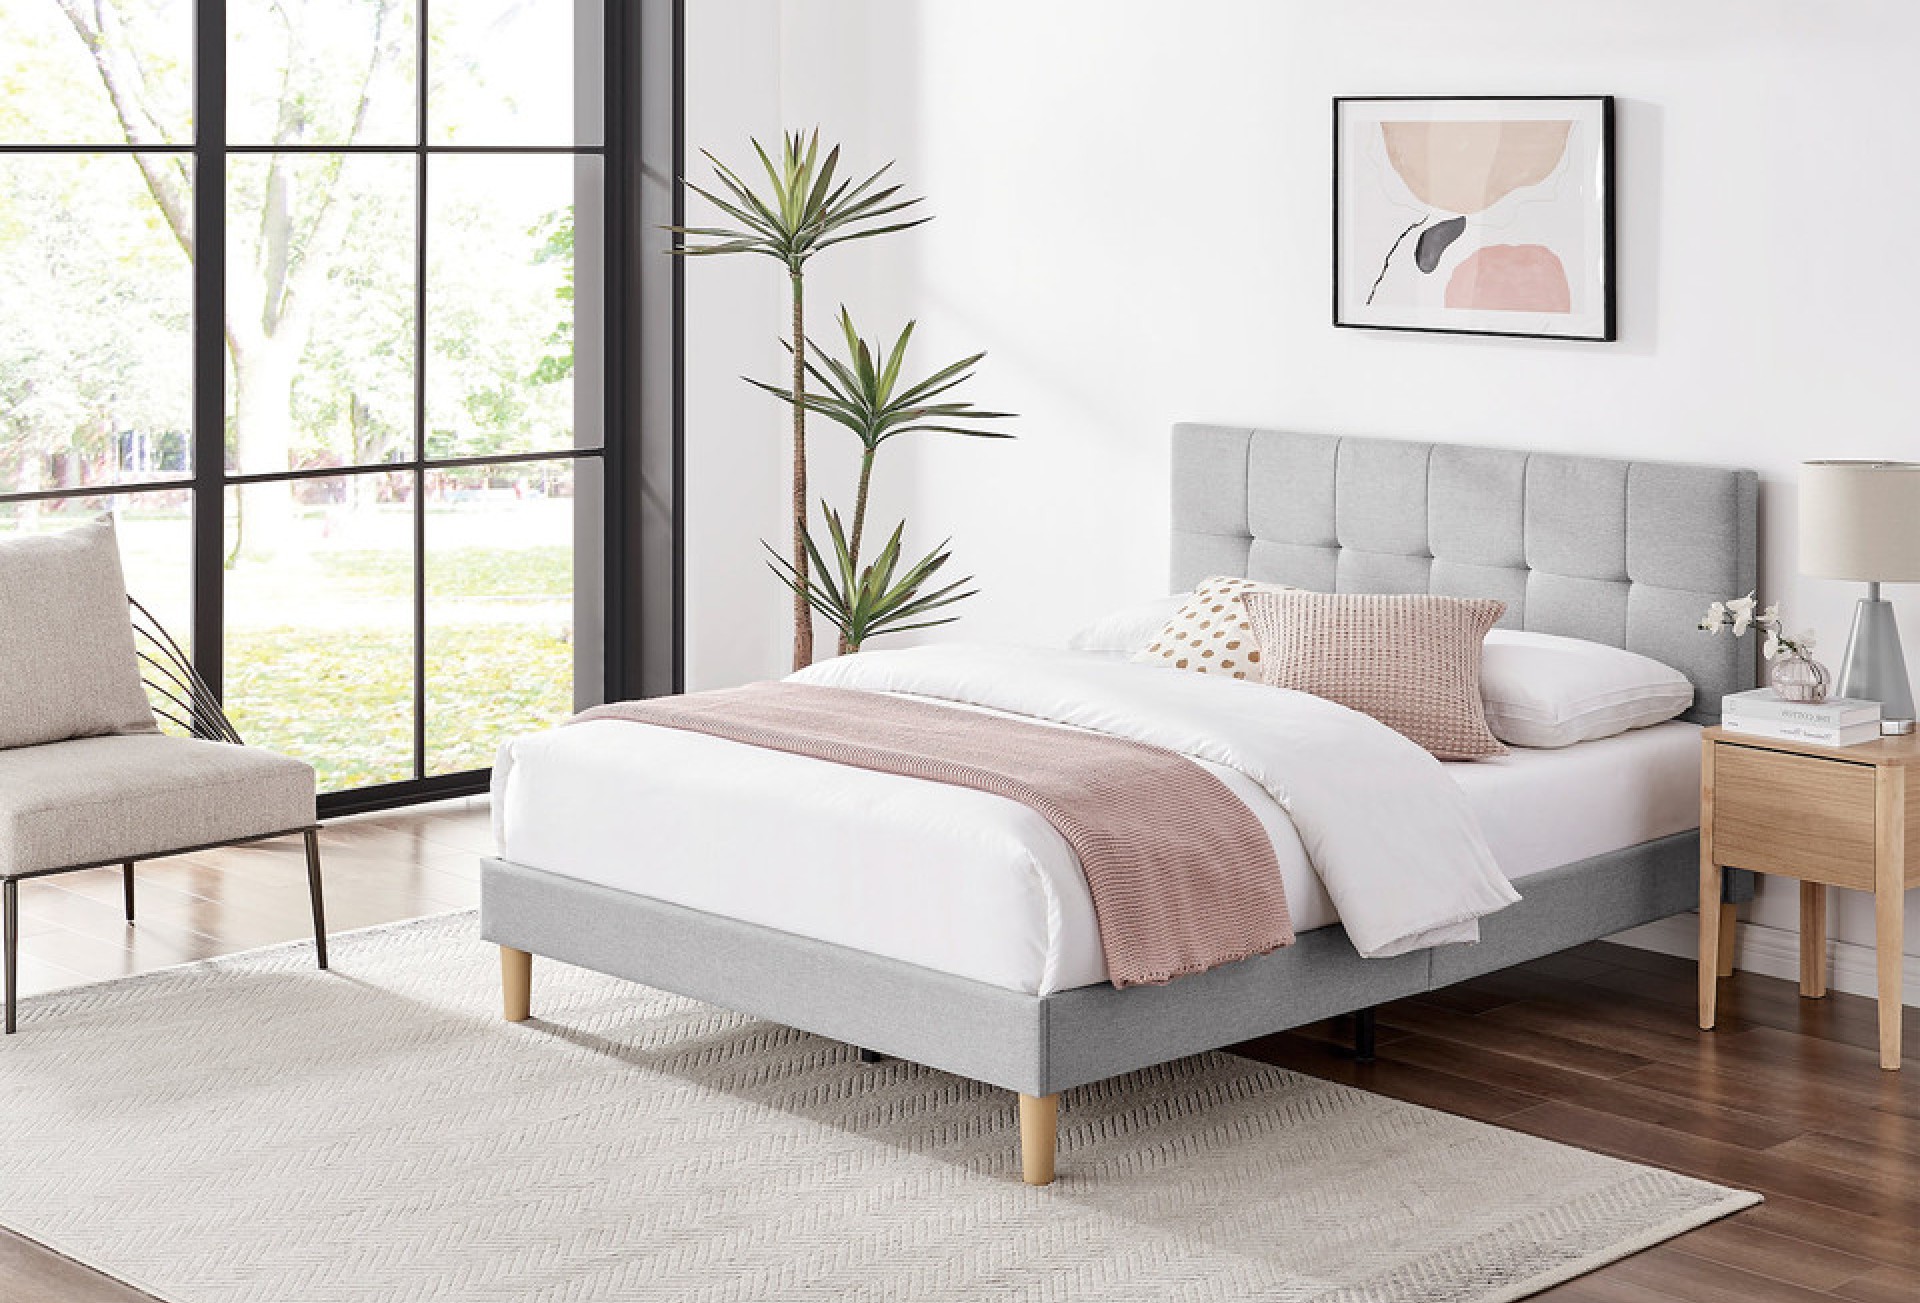 Hattie wood and upholstered bed frame in light grey